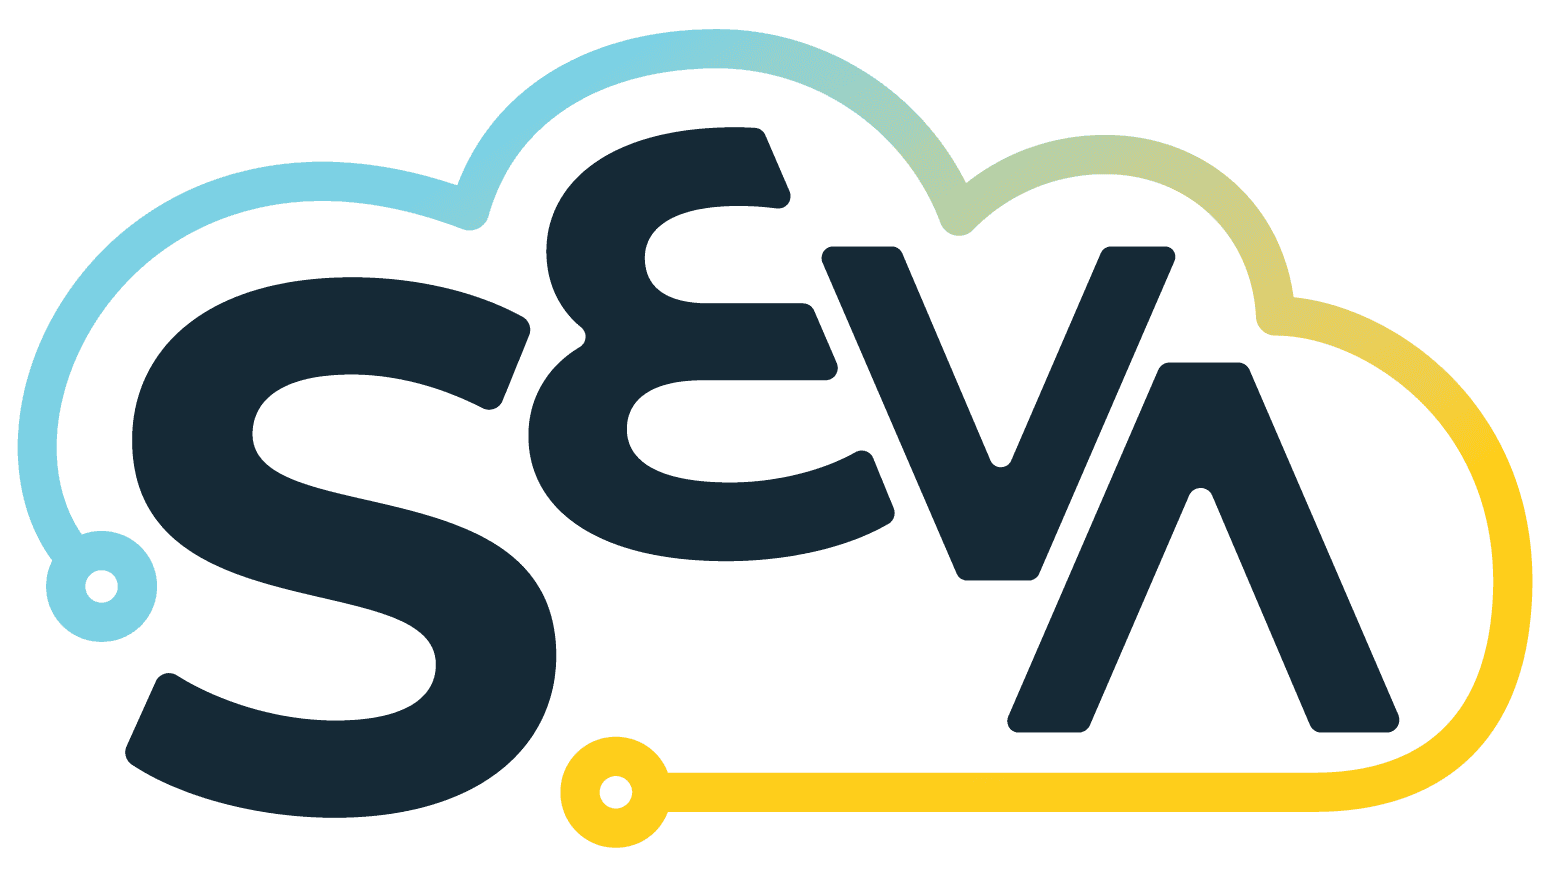 Seva Cloud Logo A Cloud that fades from blue to yellow With the word Seva Inside